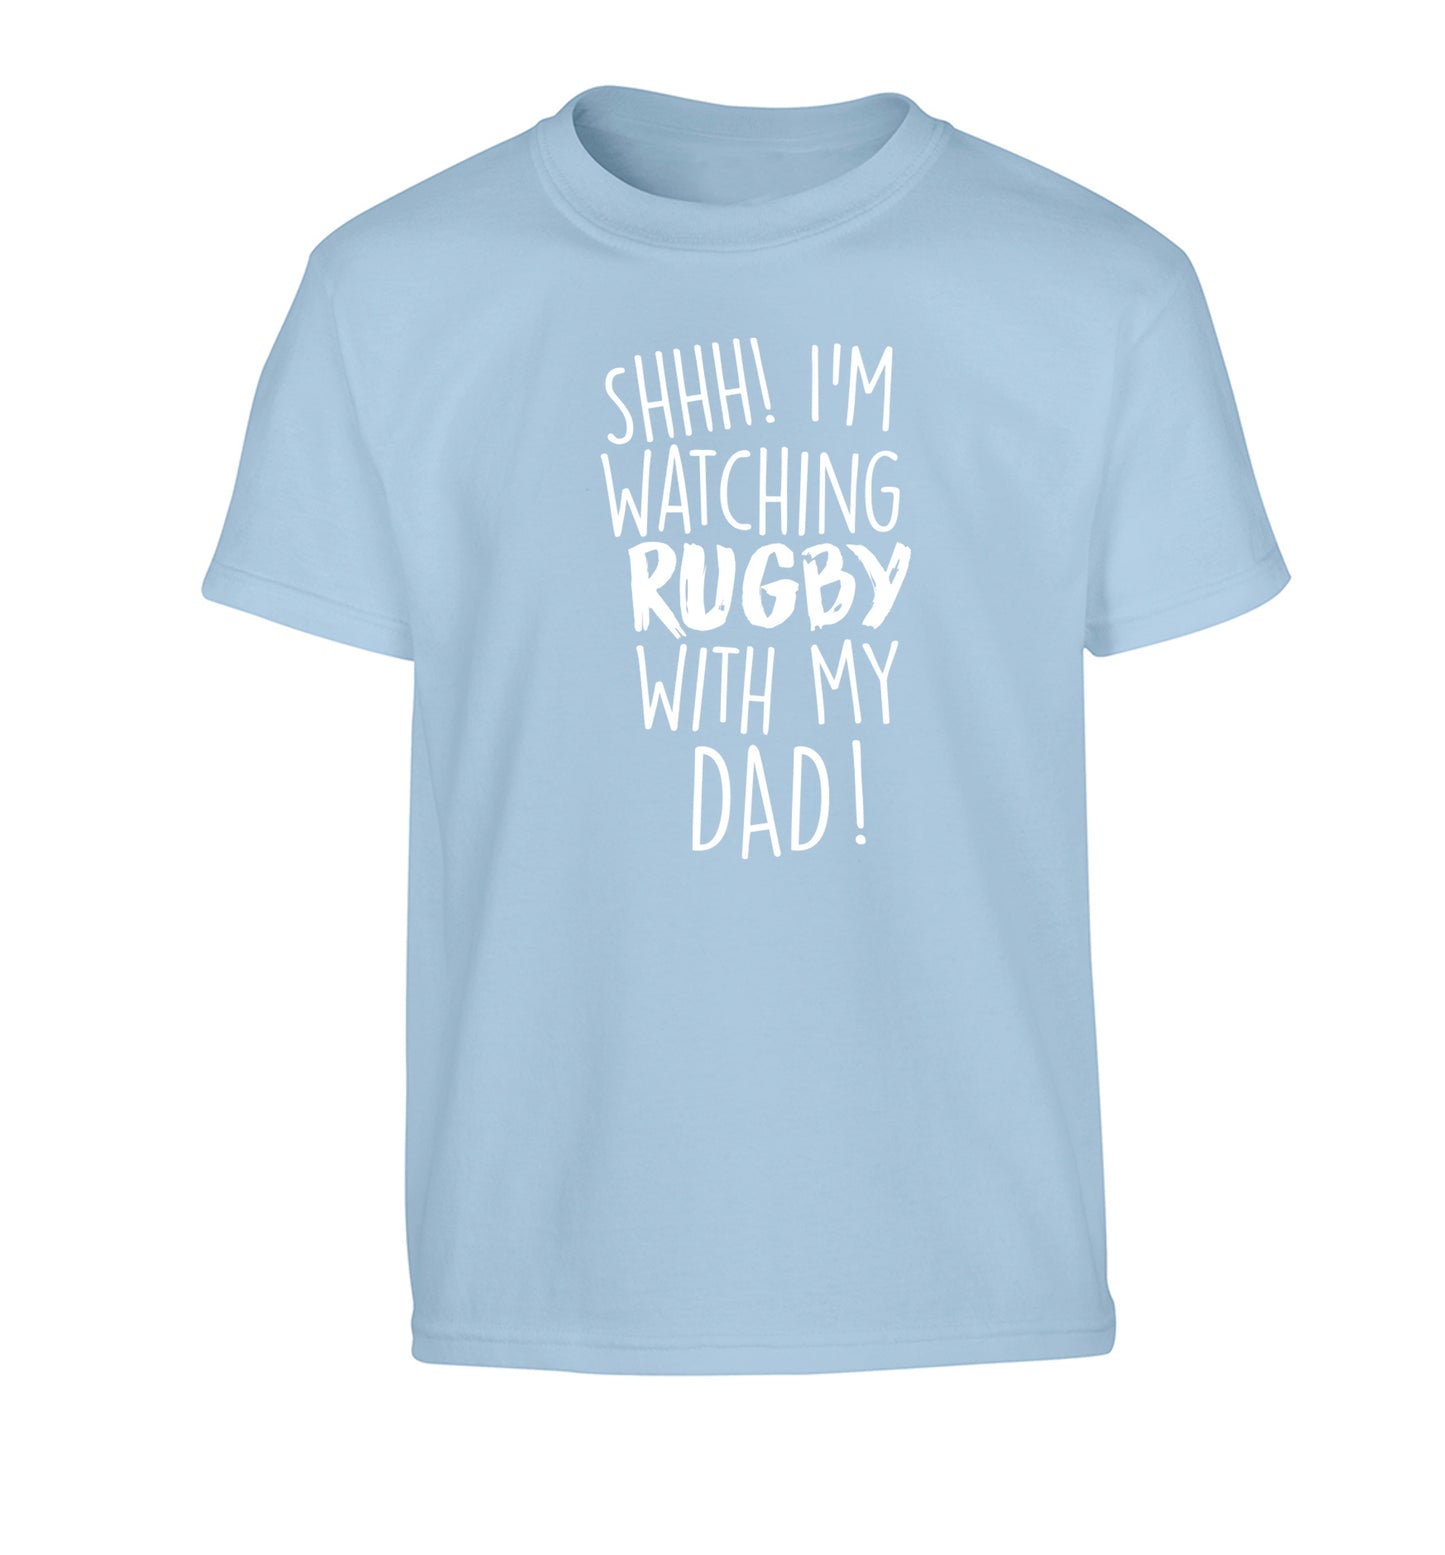 Shh... I'm watching rugby with my dad Children's light blue Tshirt 12-13 Years